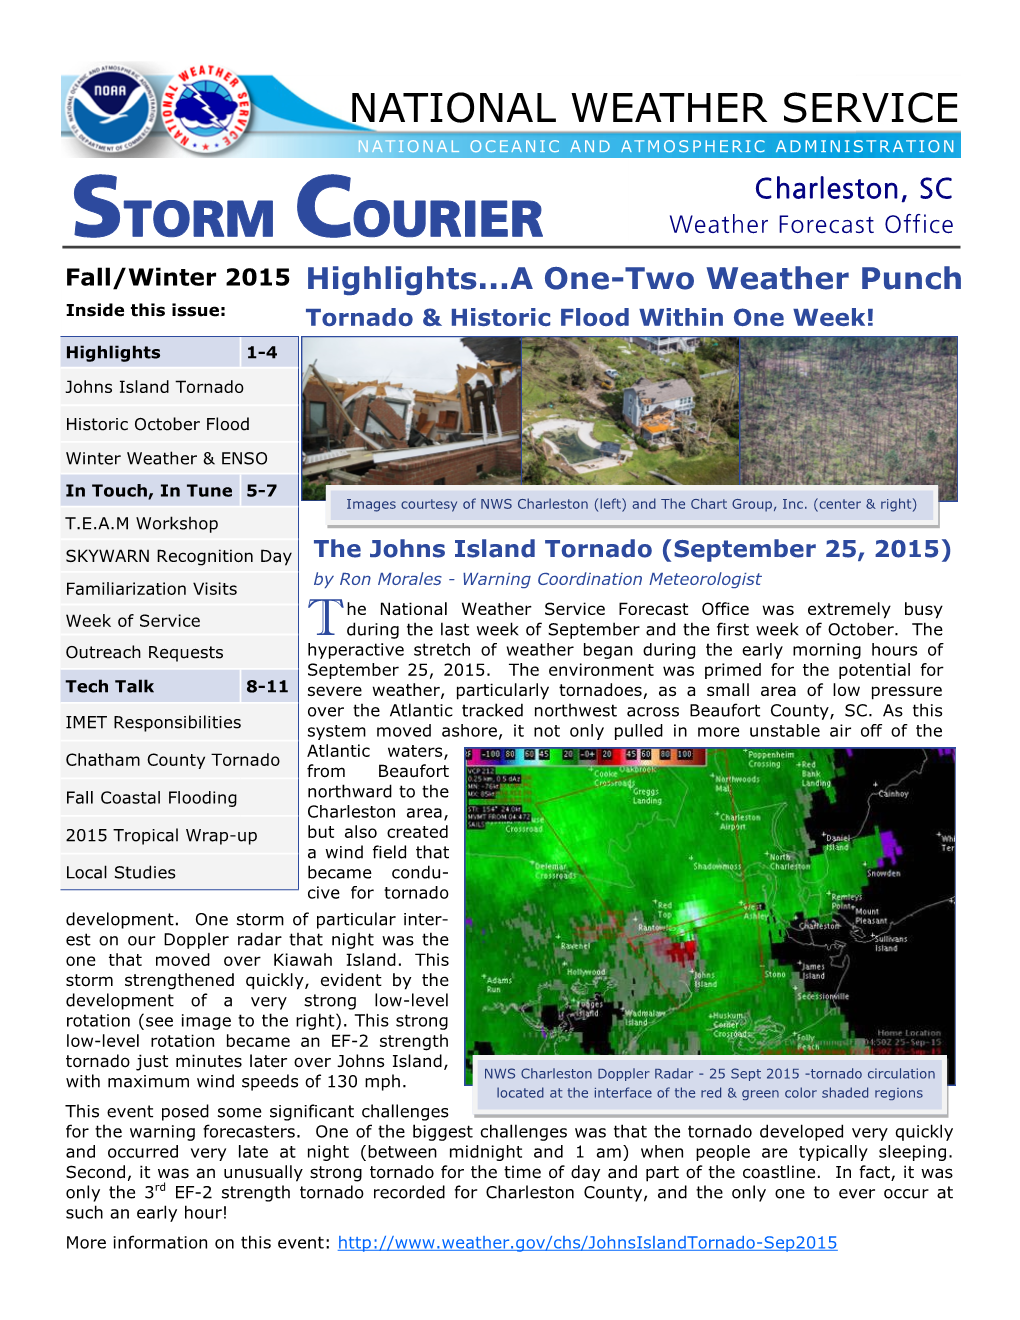 Fall/Winter 2015 Highlights...A One-Two Weather Punch Inside This Issue: Tornado & Historic Flood Within One Week! Highlights 1-4